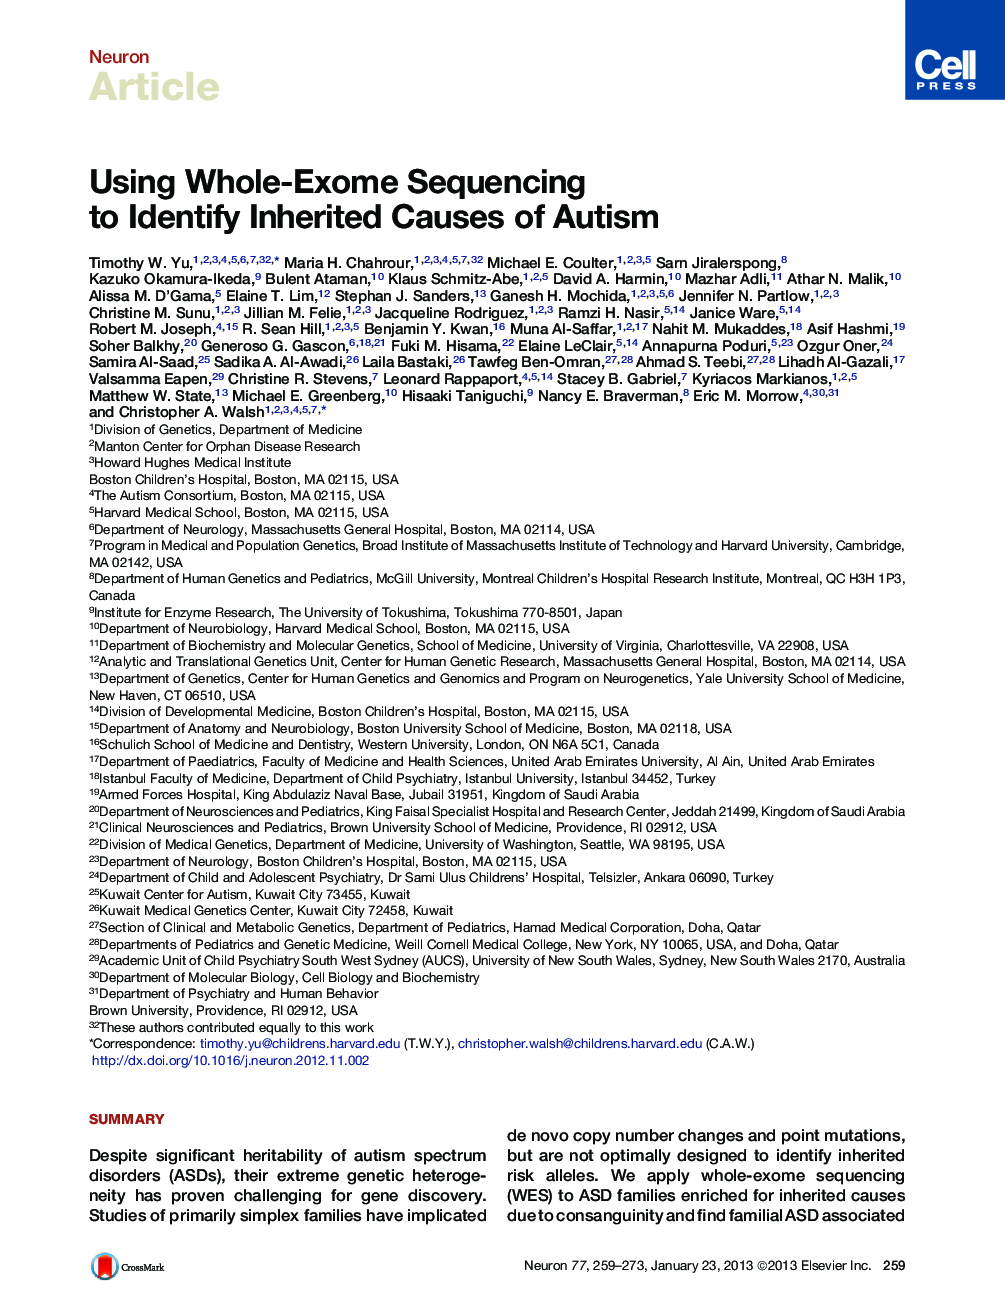 Using Whole-Exome Sequencing to Identify Inherited Causes of Autism